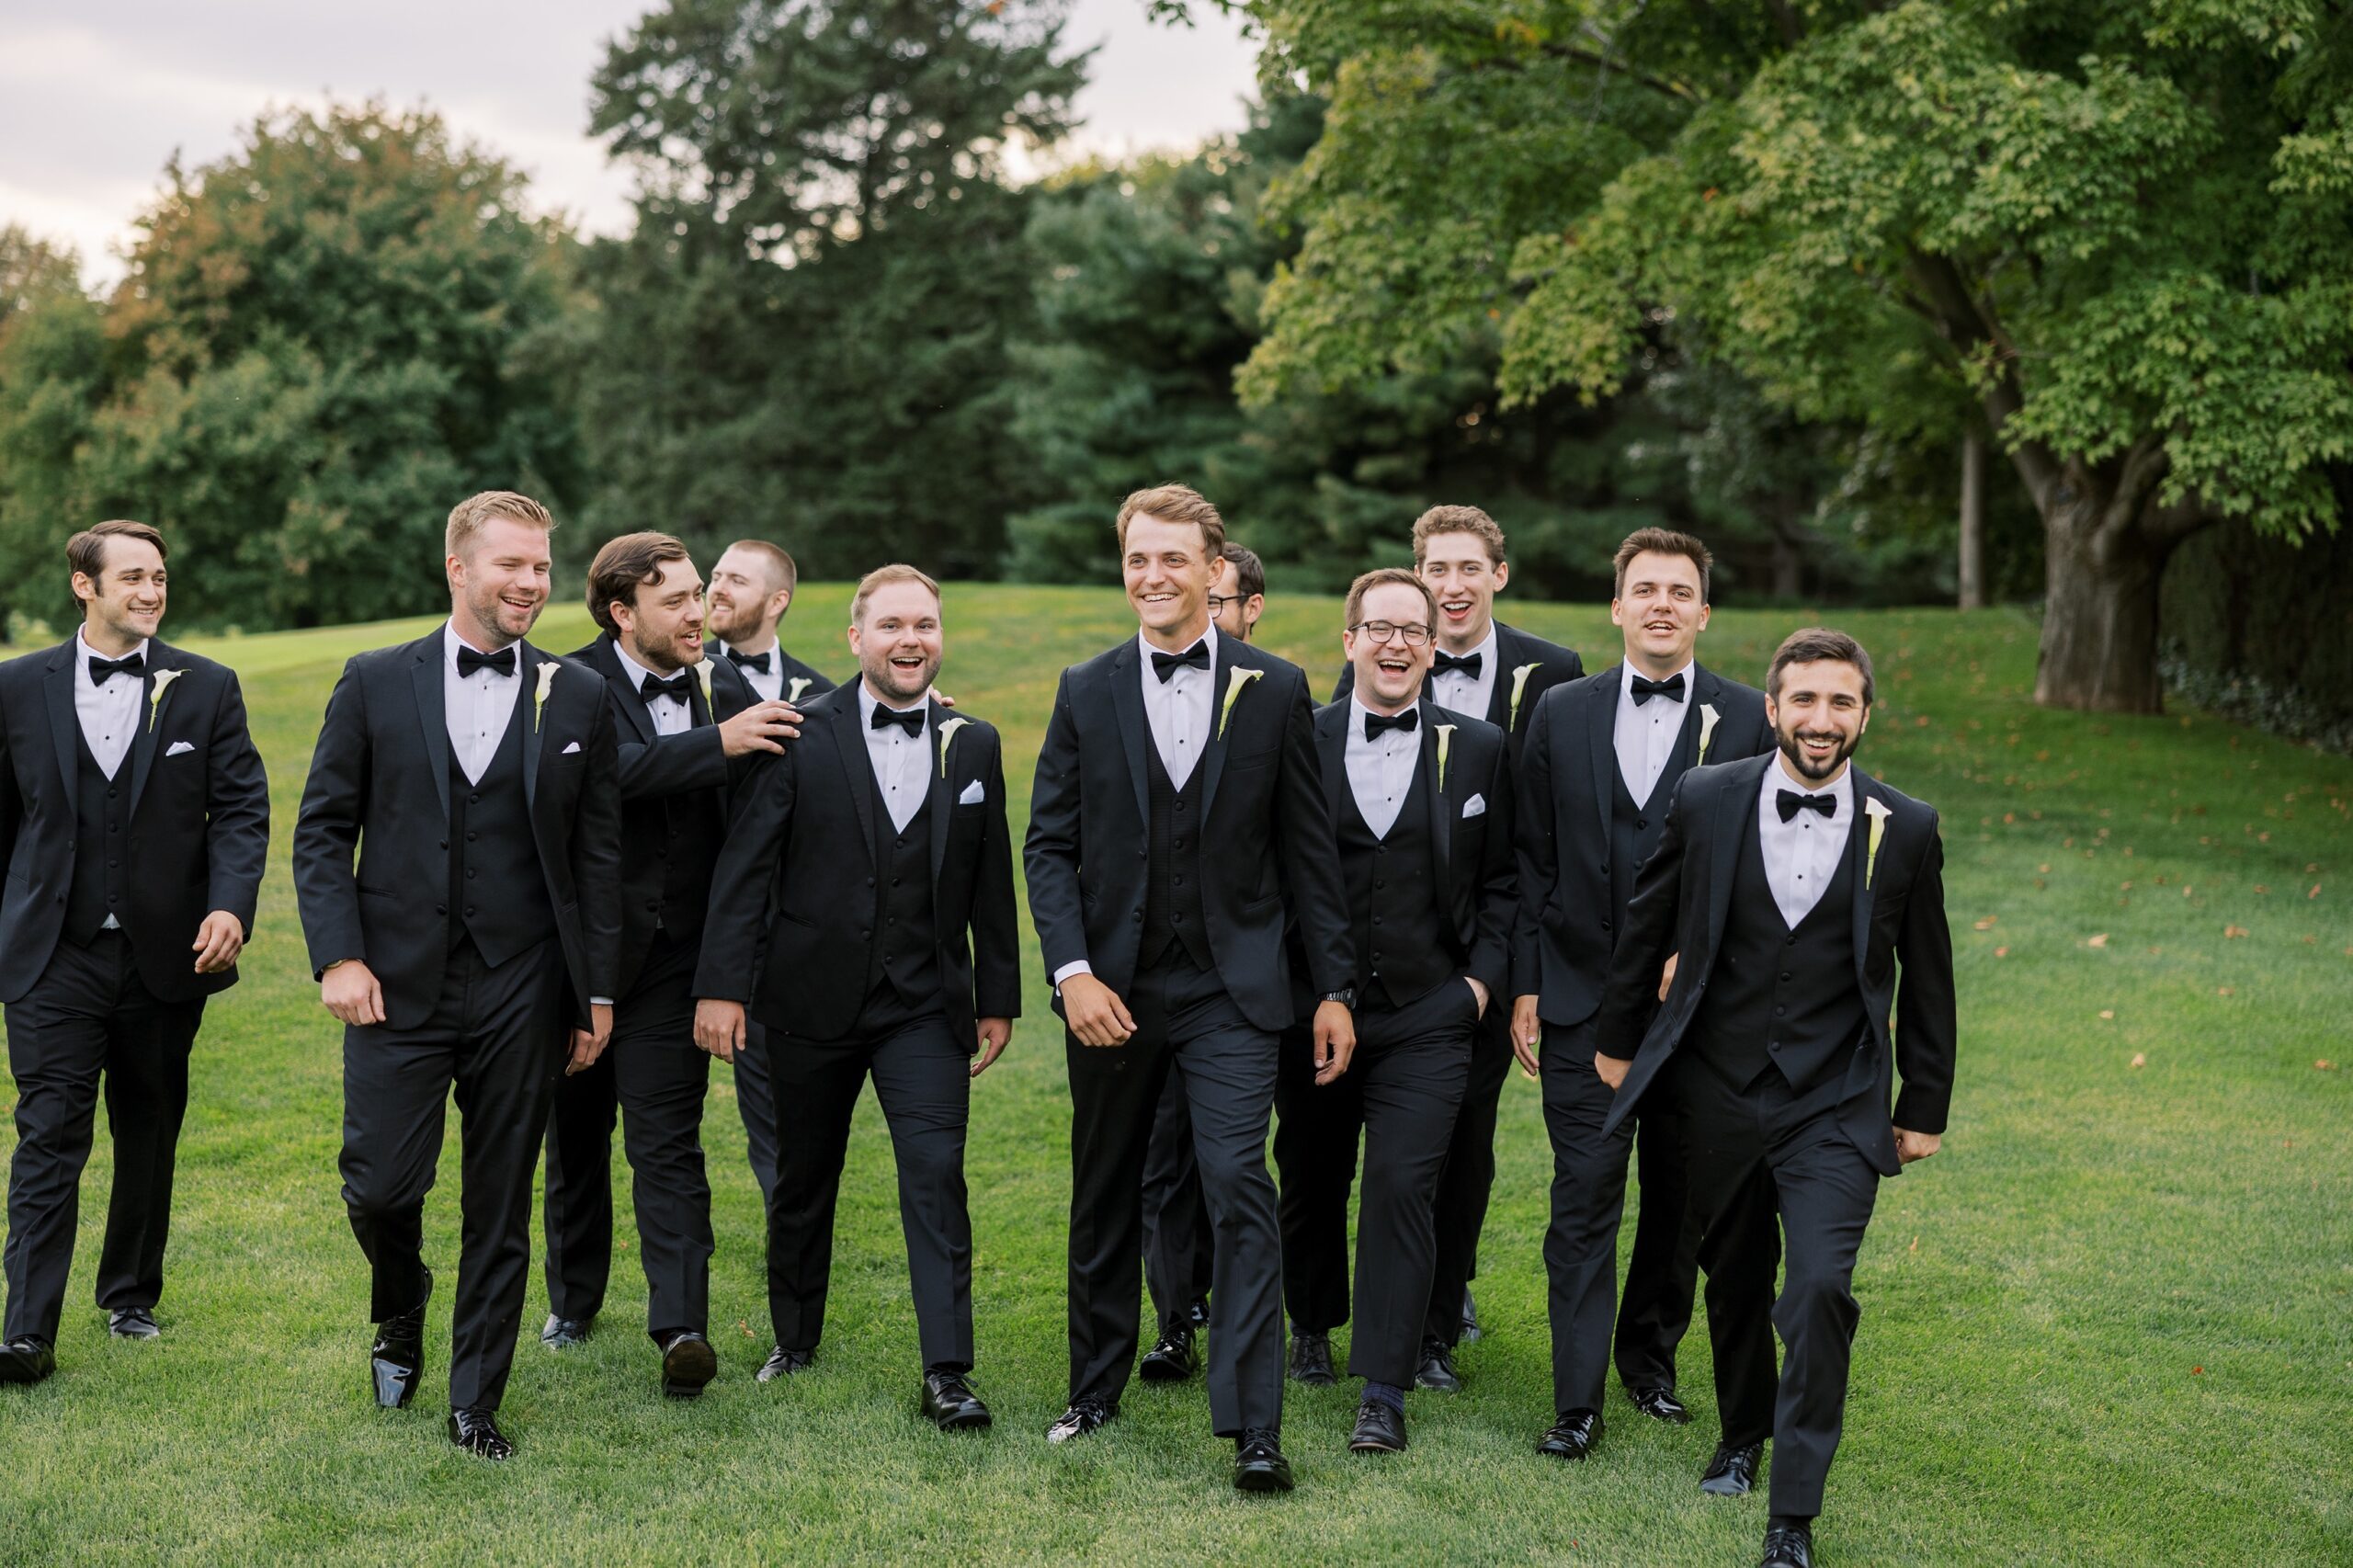 The groom and groomsmen posed at the Westmoreland Country Club wedding